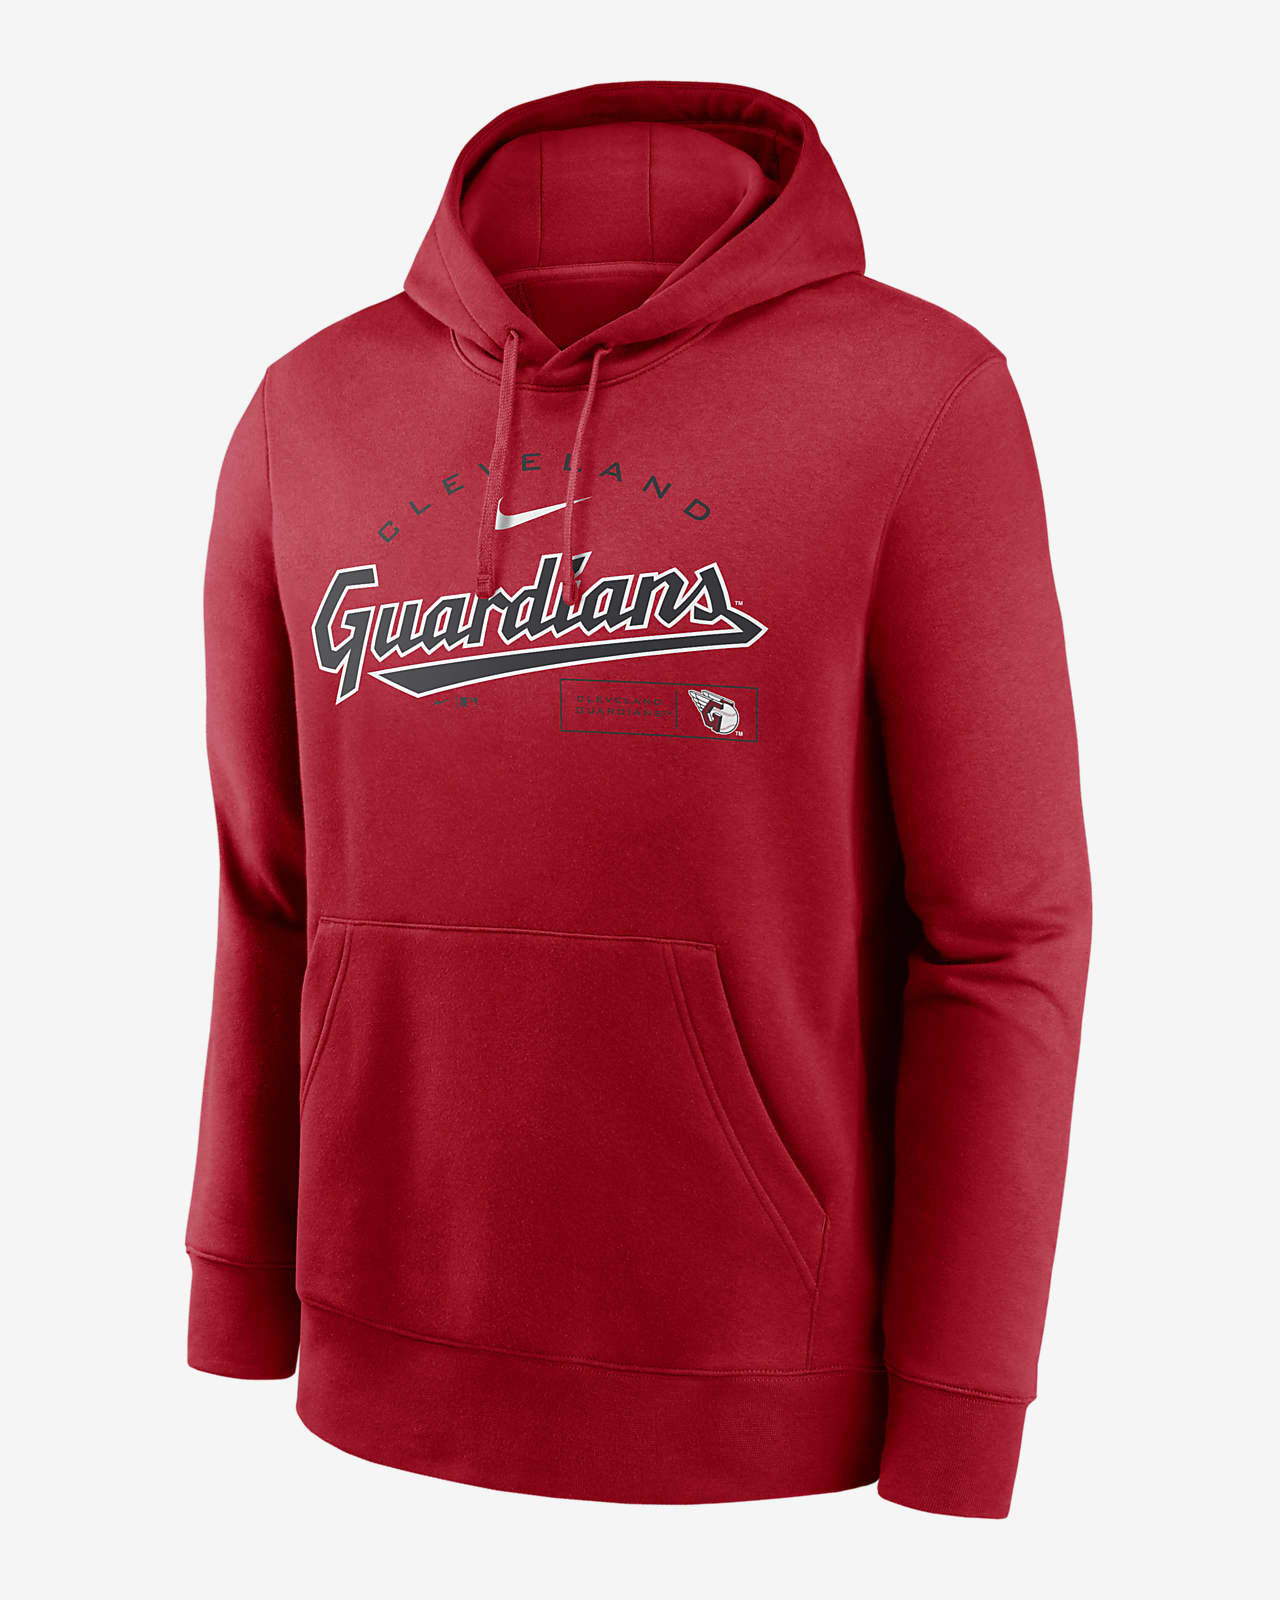 Nike Team Arch (MLB Cleveland Guardians) Men’s Pullover Hoodie